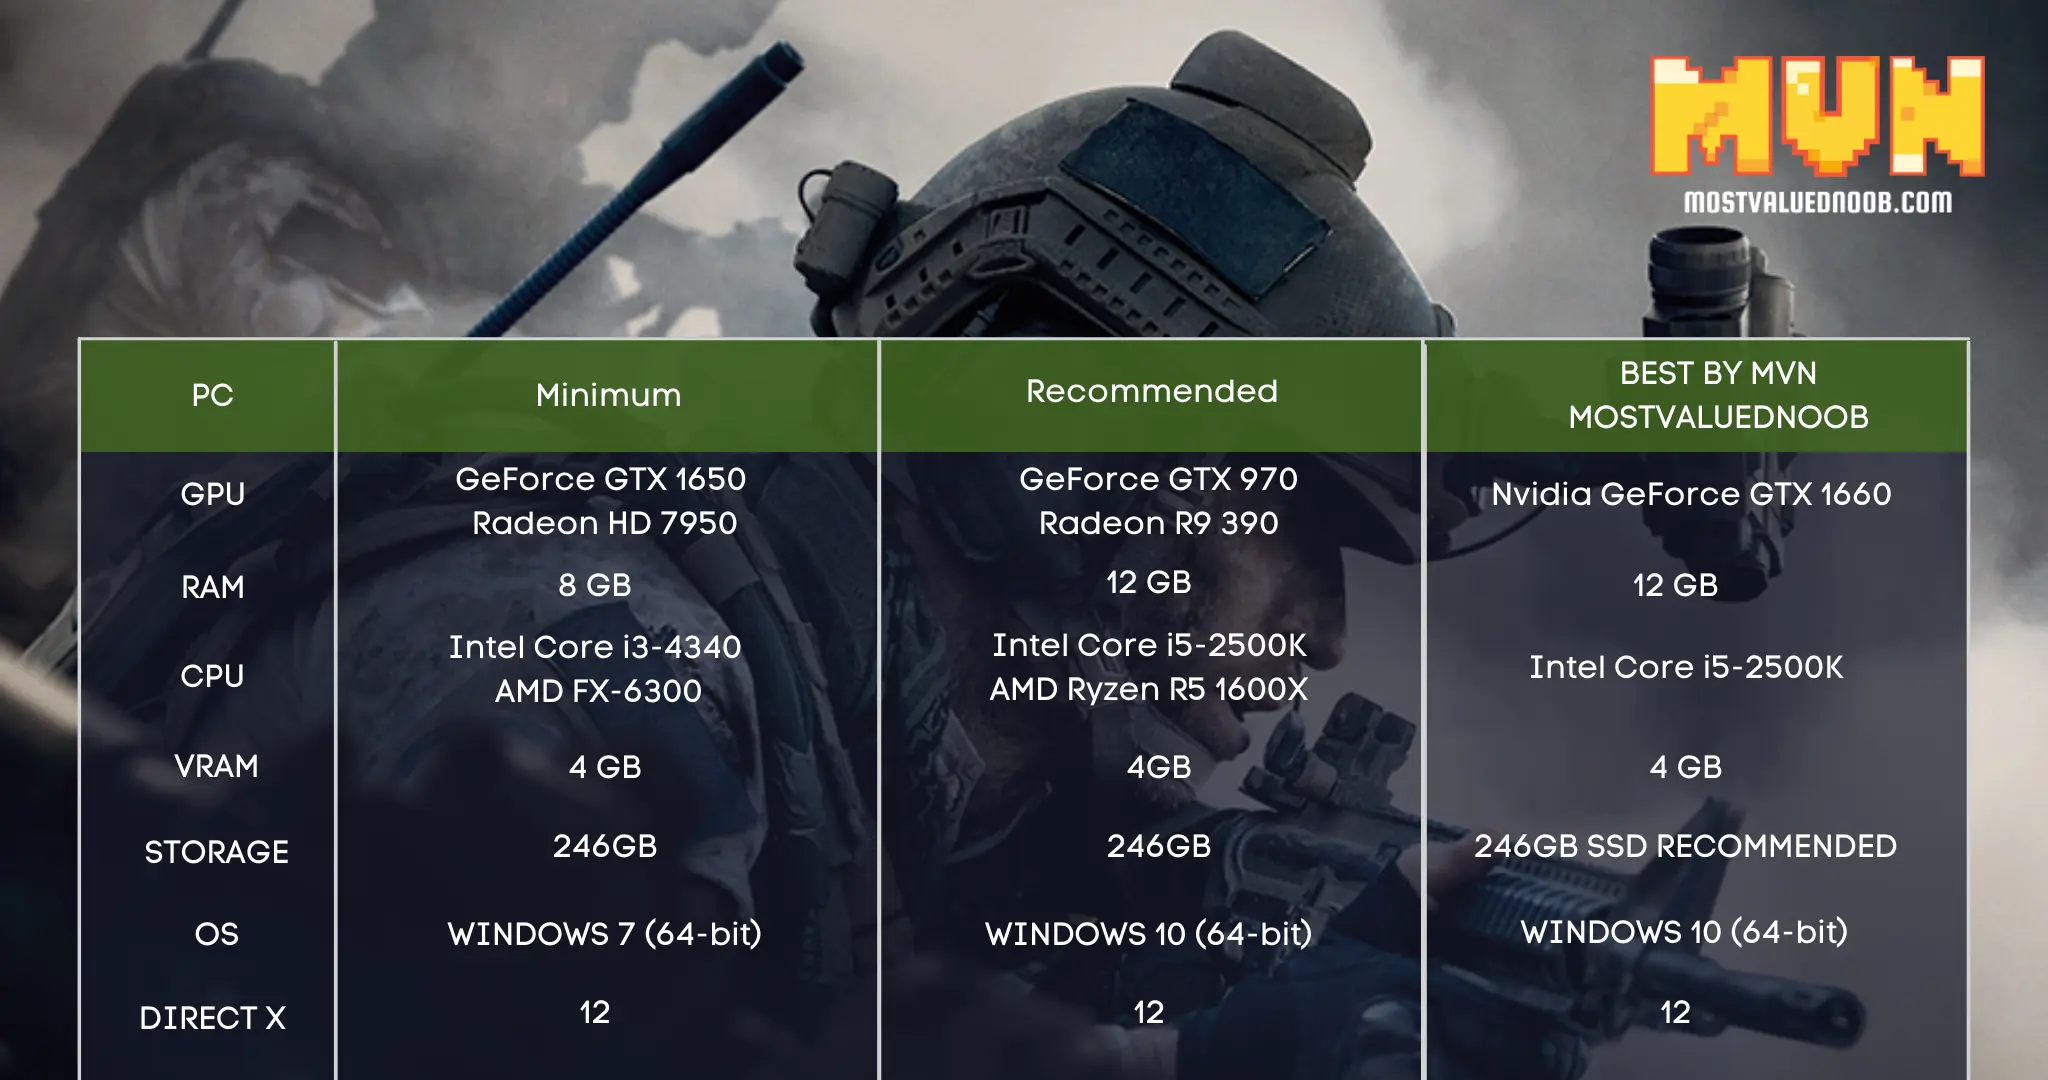 Call of Duty Modern Warfare System Requirements